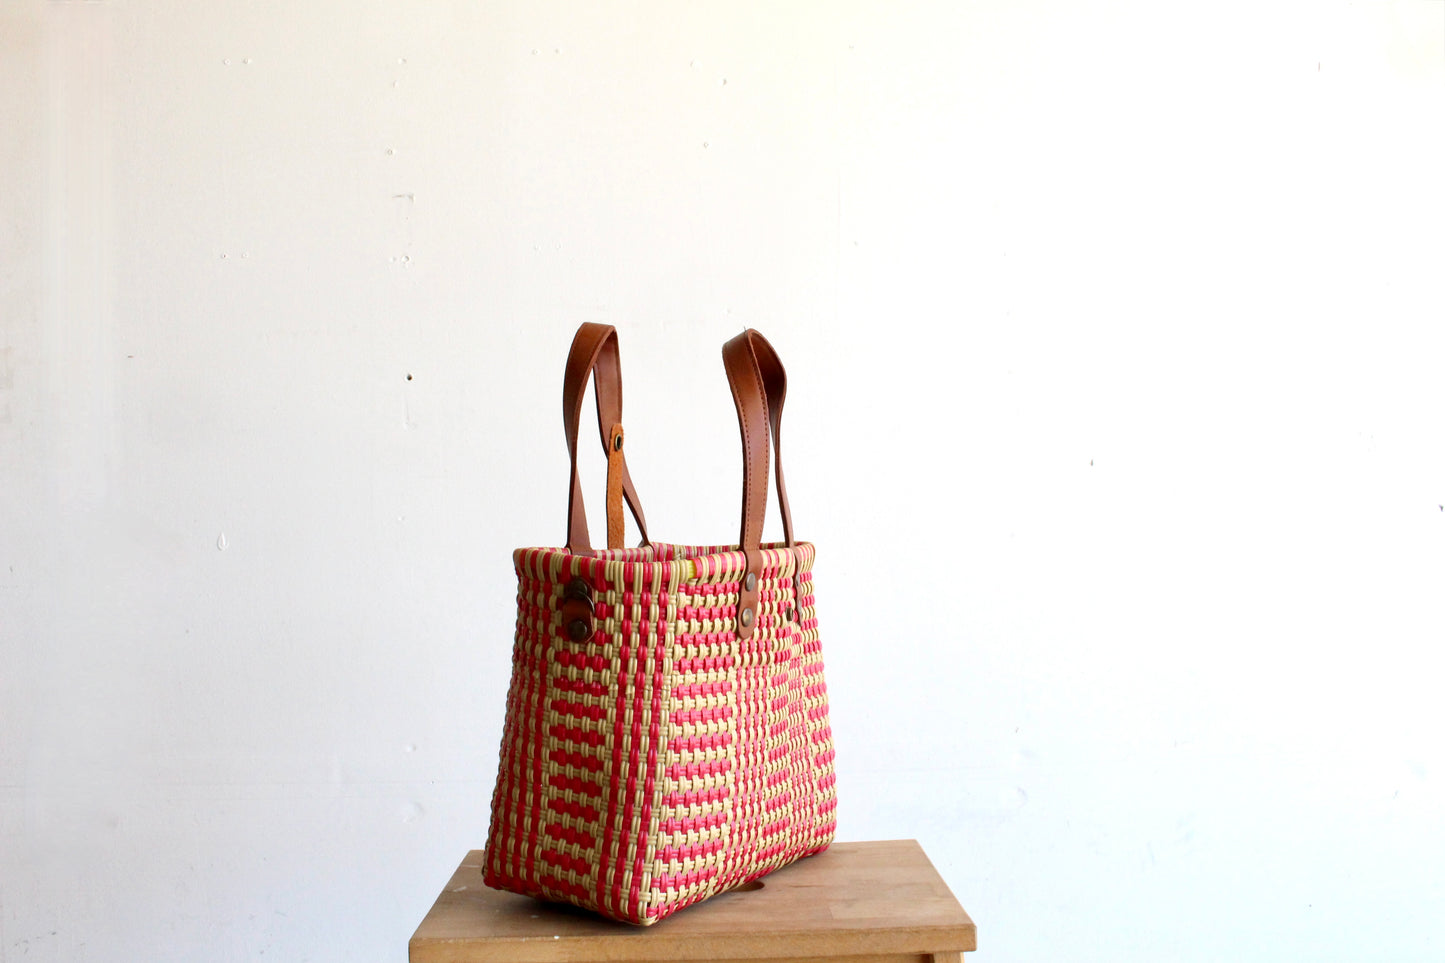 Beige & Red Purse bag by MexiMexi